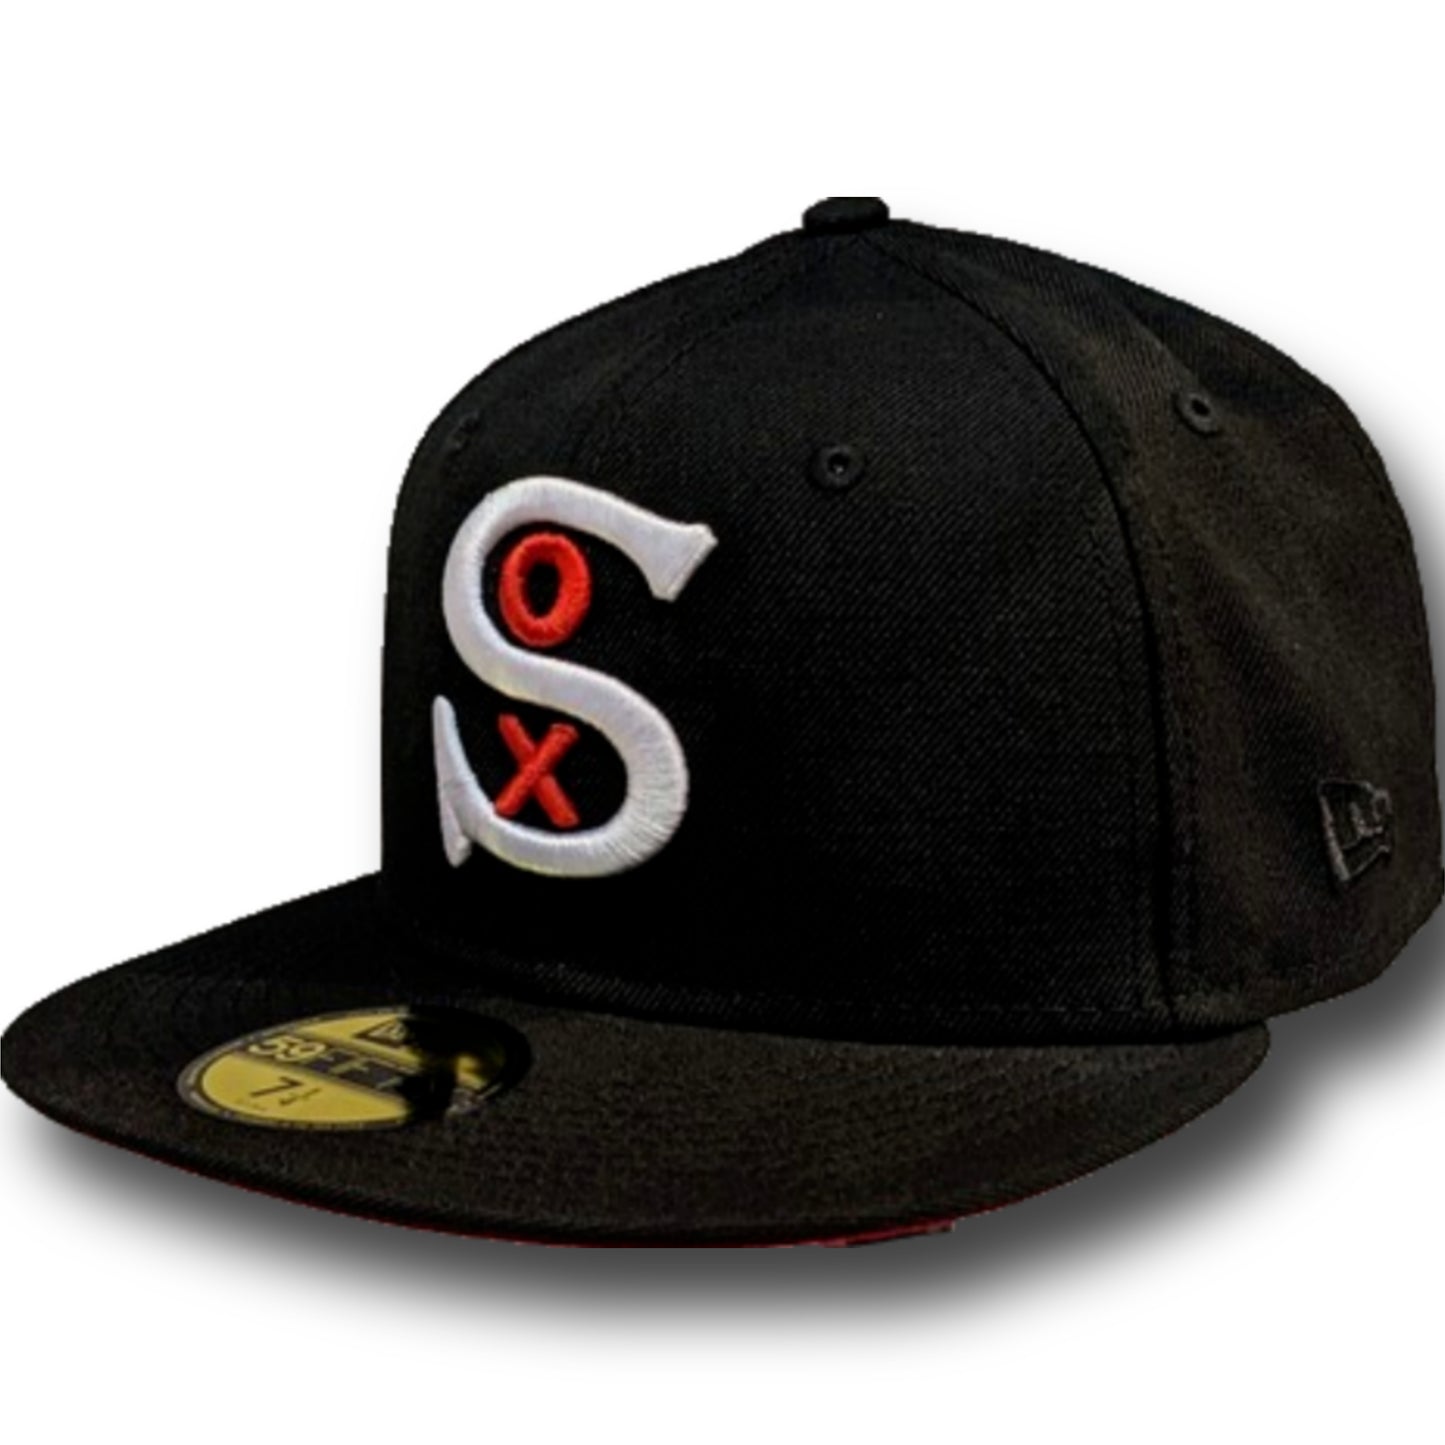 Men's Chicago White Sox New Era 1917 Logo Black Cooperstown Collection 59Fifty Hat